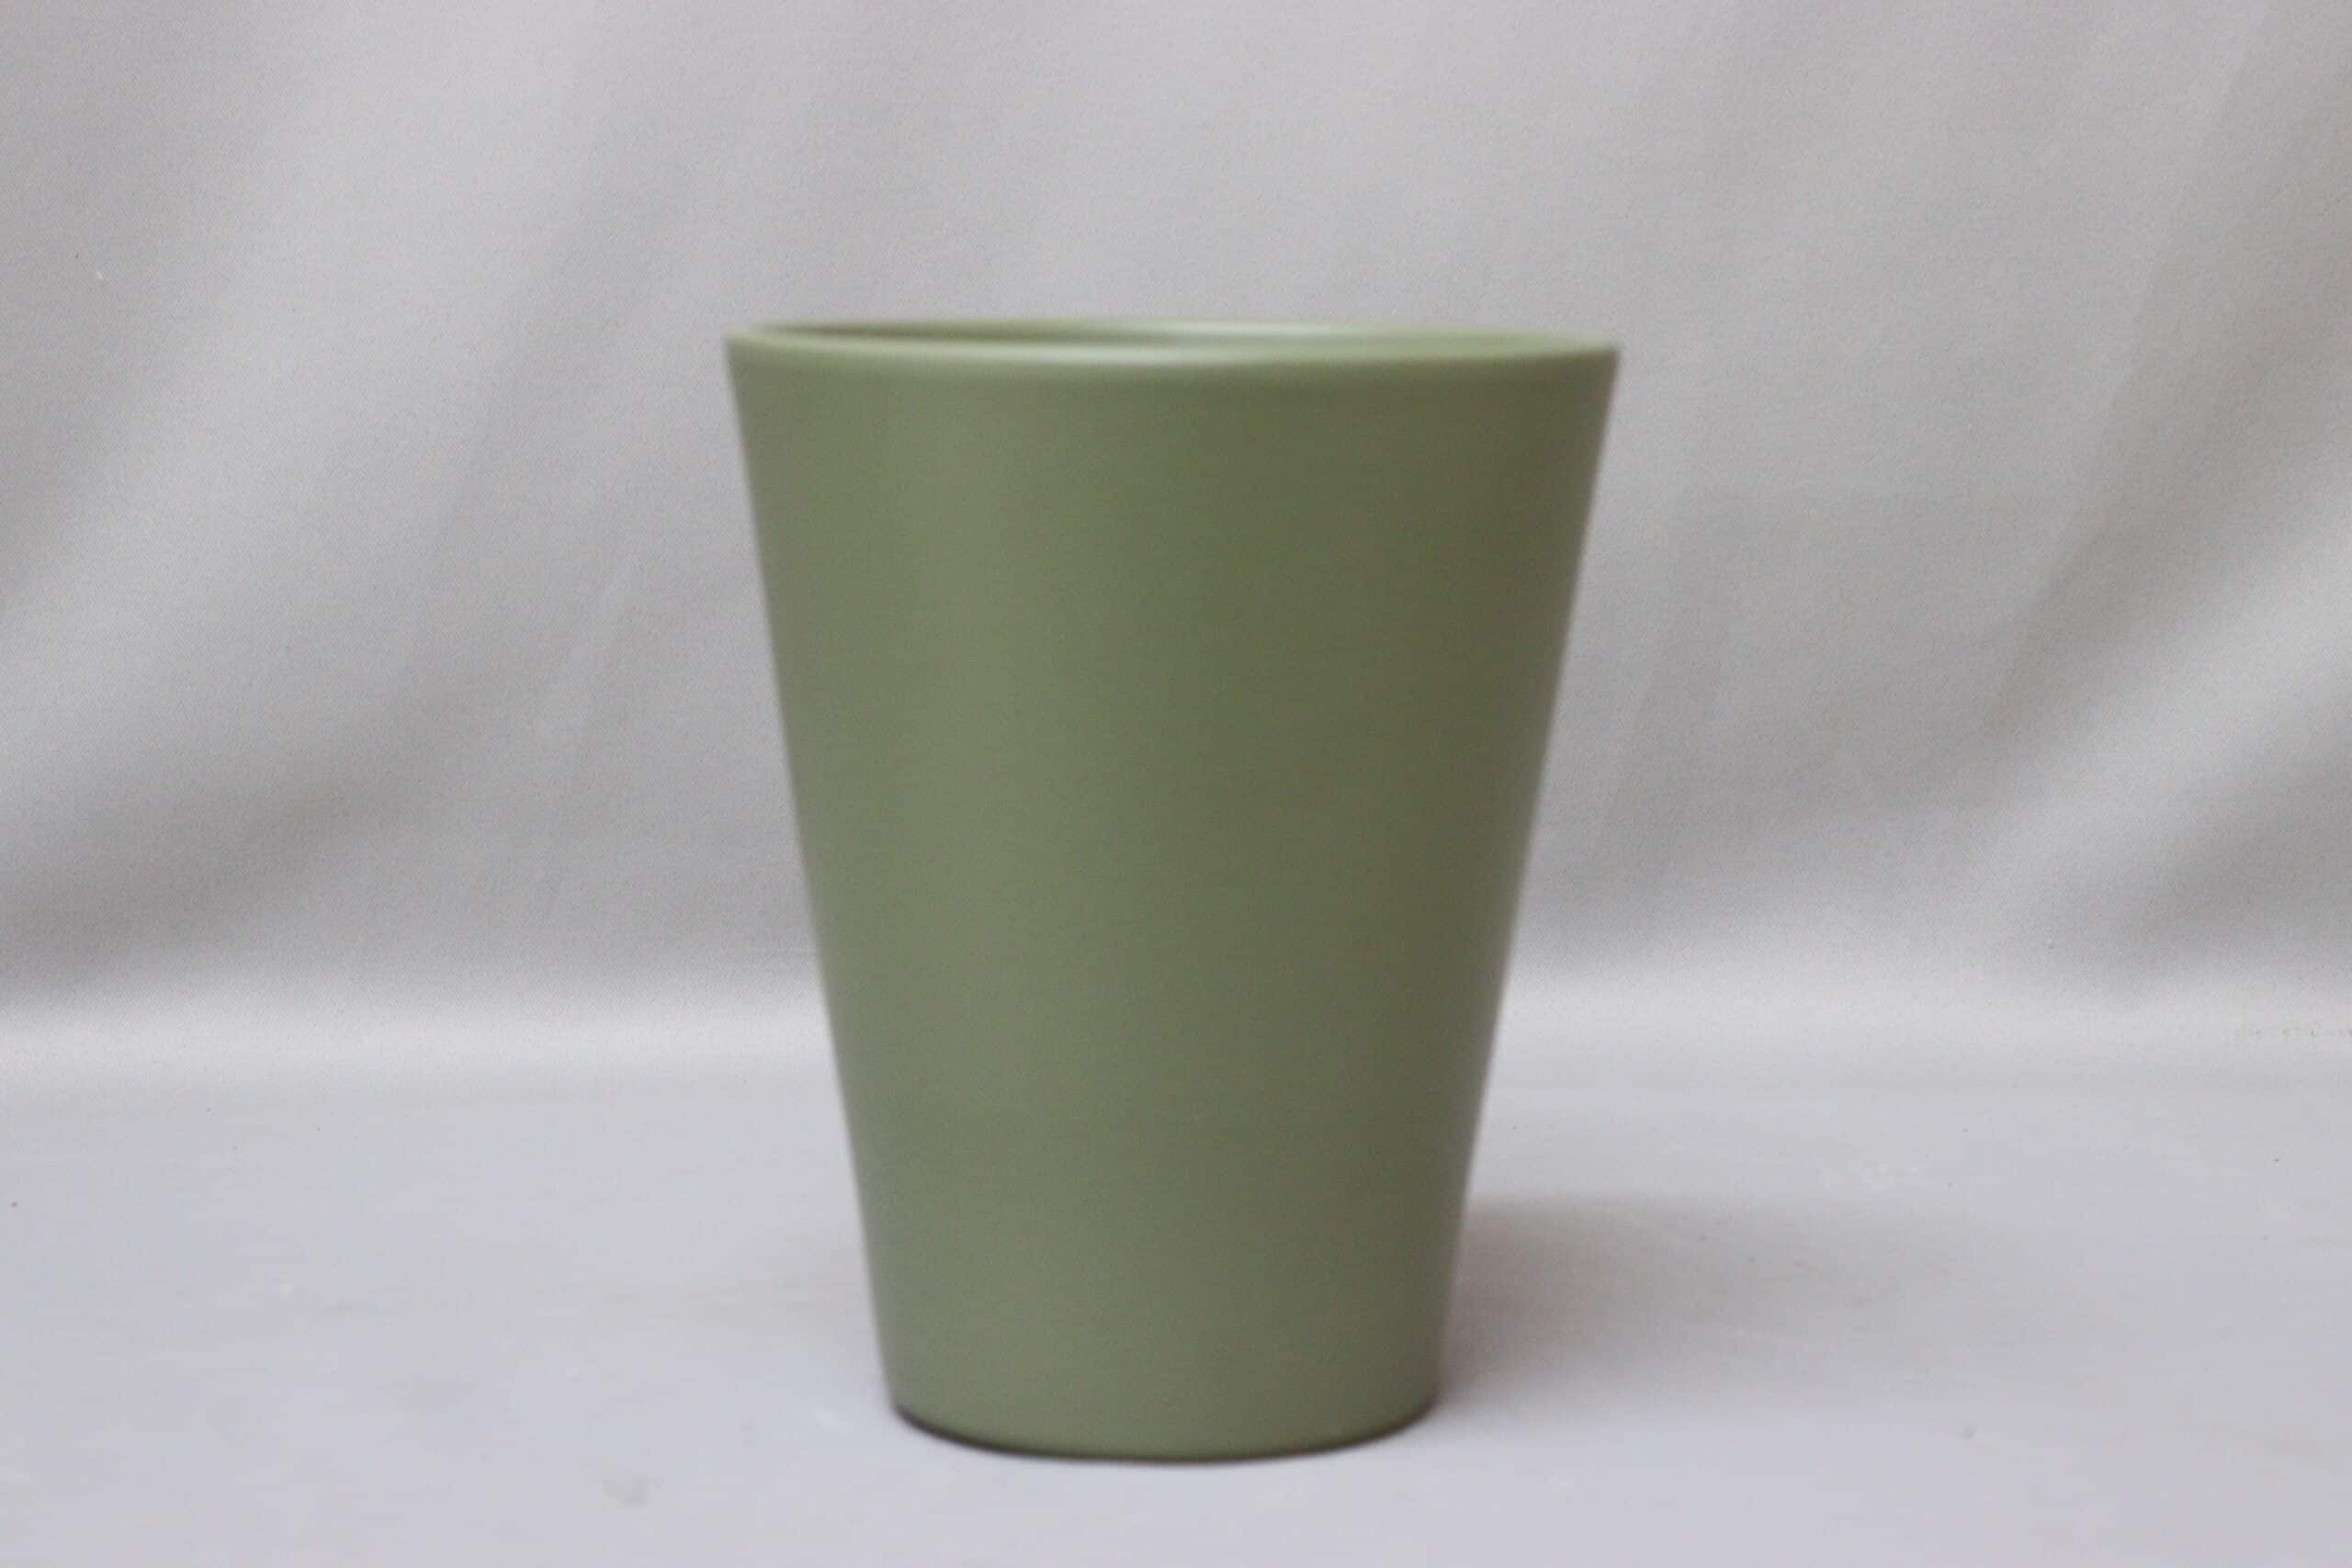 Smooth bottle green pot cover for potted plants.